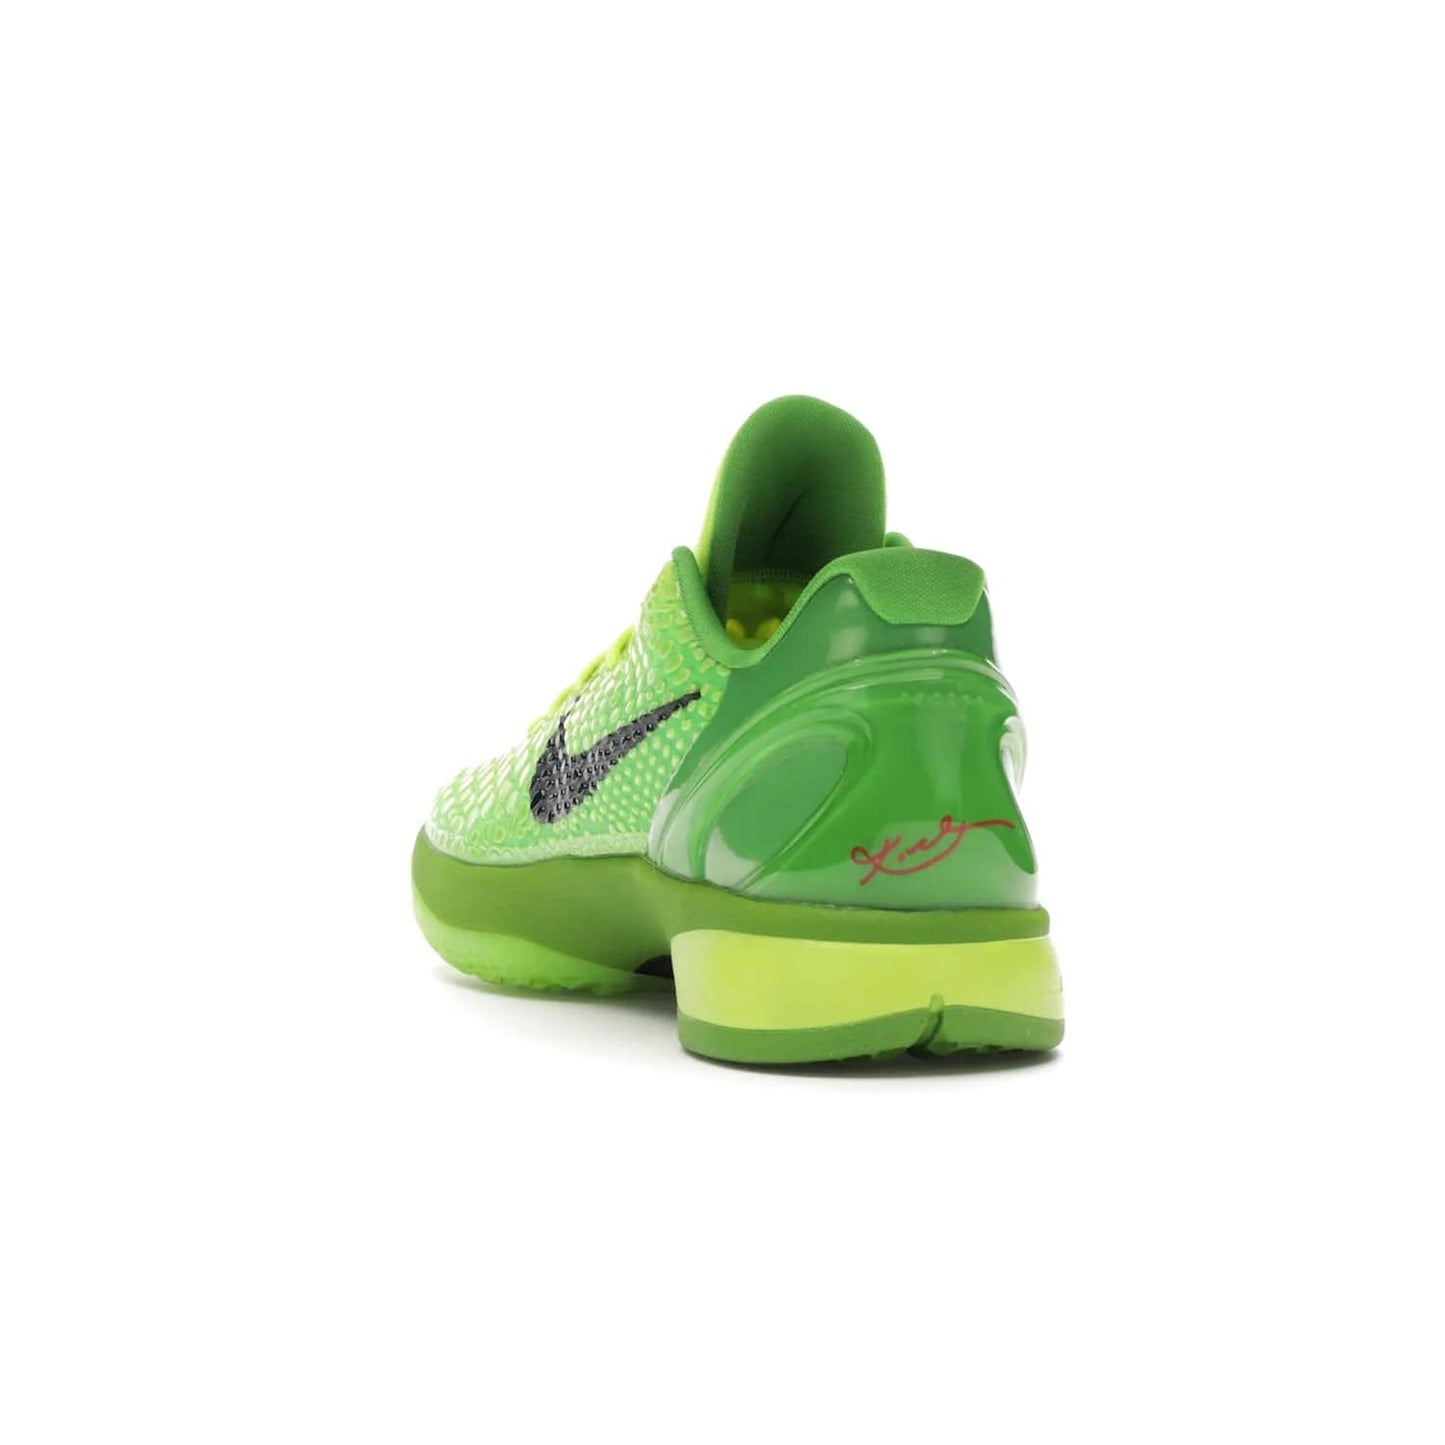 Nike Kobe 6 Protro Grinch (2020) - Image 26 - Only at www.BallersClubKickz.com - #
The Nike Kobe 6 Protro Grinch updates the iconic 2011 design with modern tech like a Zoom Air cushioning system, scaled-down traction, and updated silhouette. Experience the textured Green Apple and Volt upper plus bright red and green accents for $180.